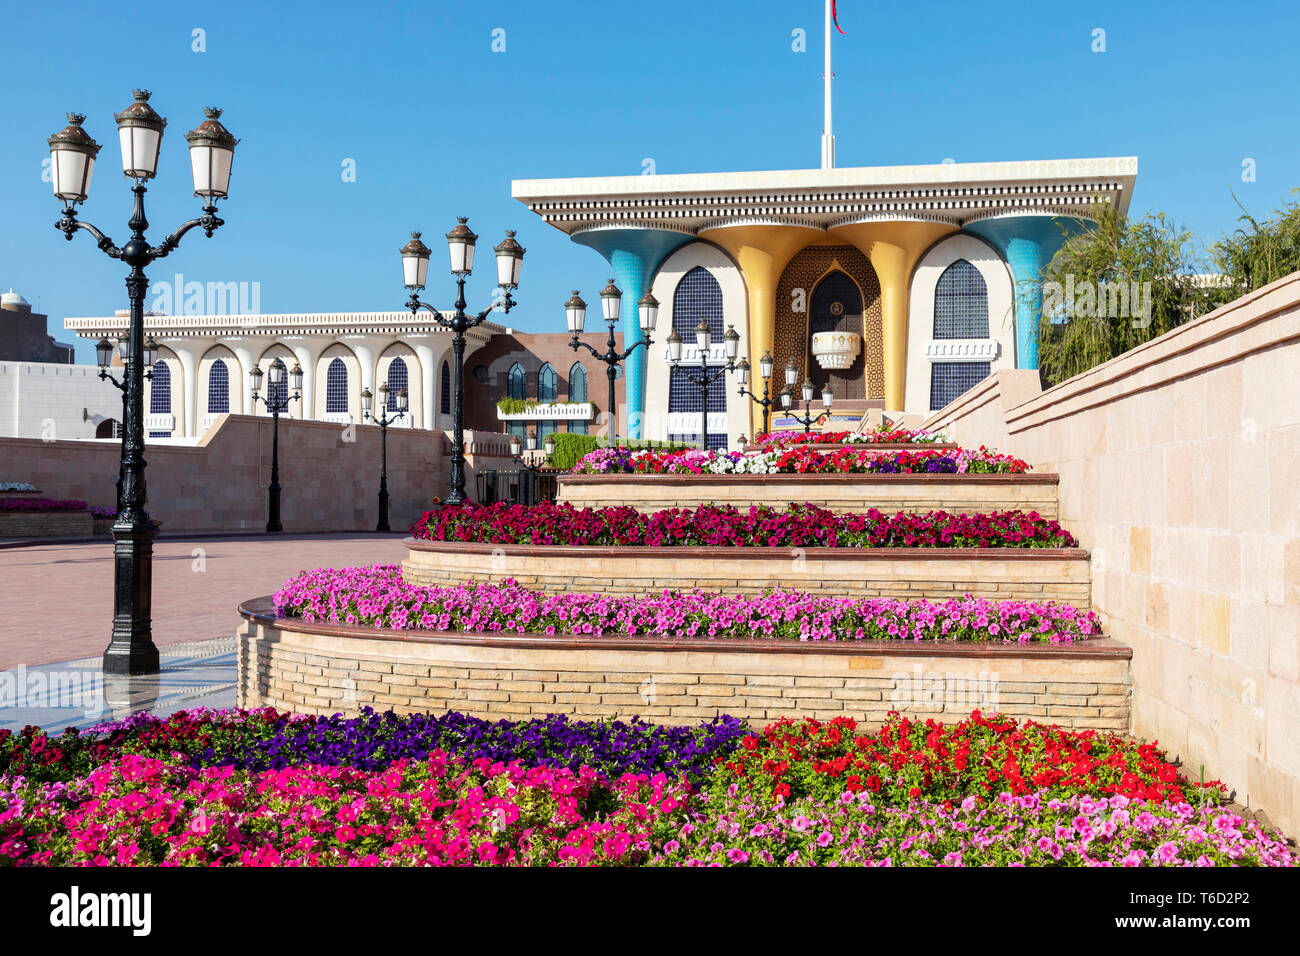 Middle East, Oman, Muscat. Rows of colourful flowers planted in front of Al Alam, the Sultan's Palace in Old Muscat. Stock Photo